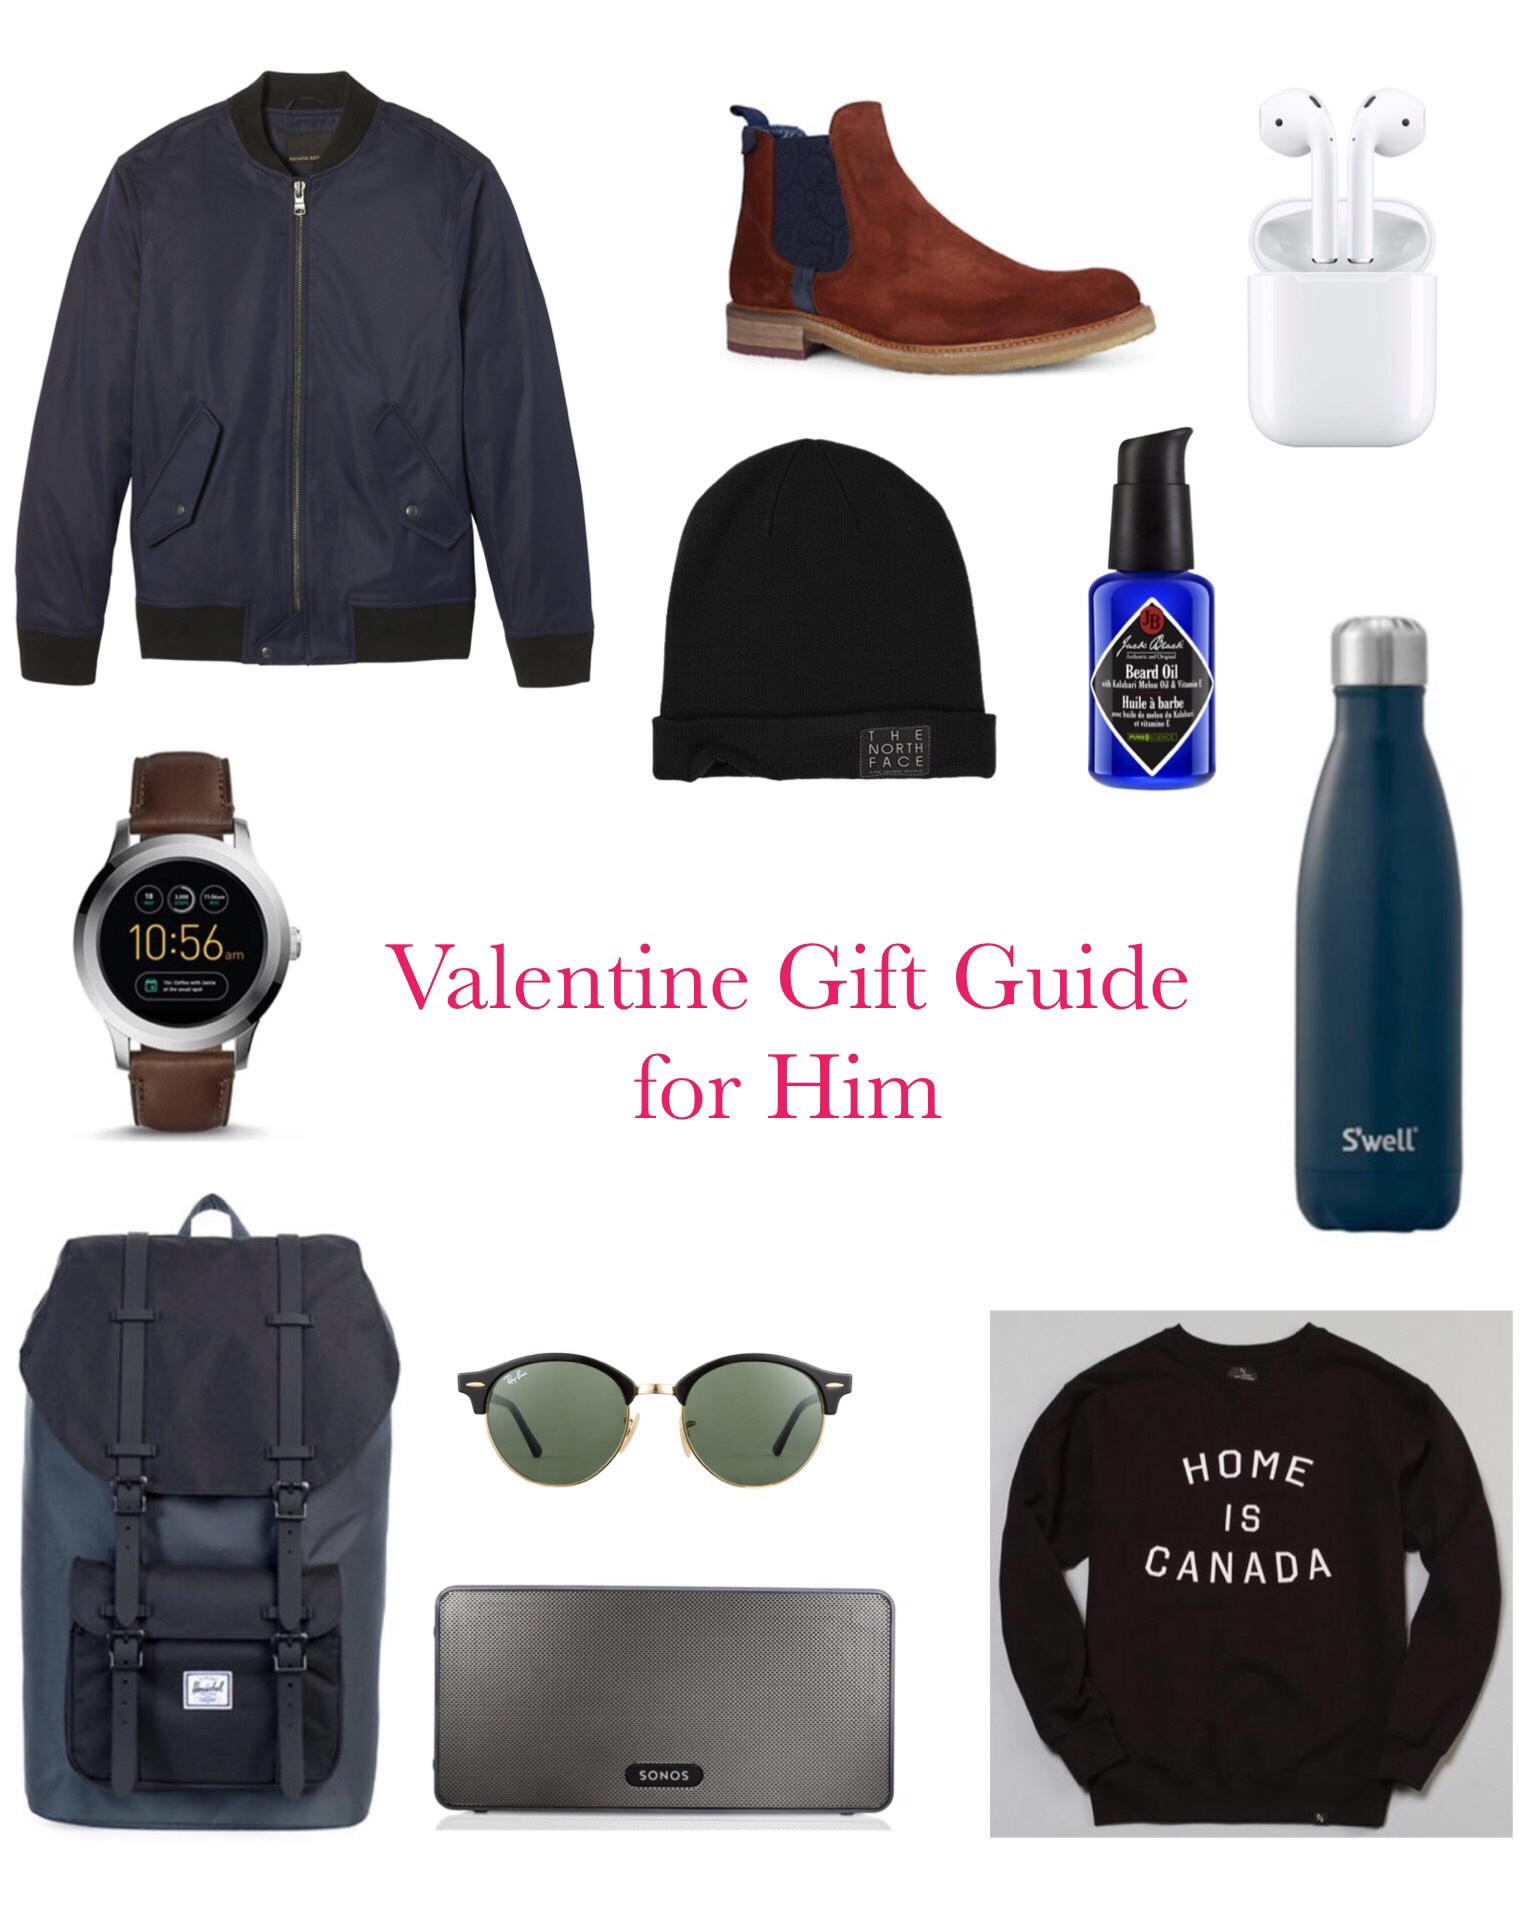 Valentine’s Day Gift Guide for Her